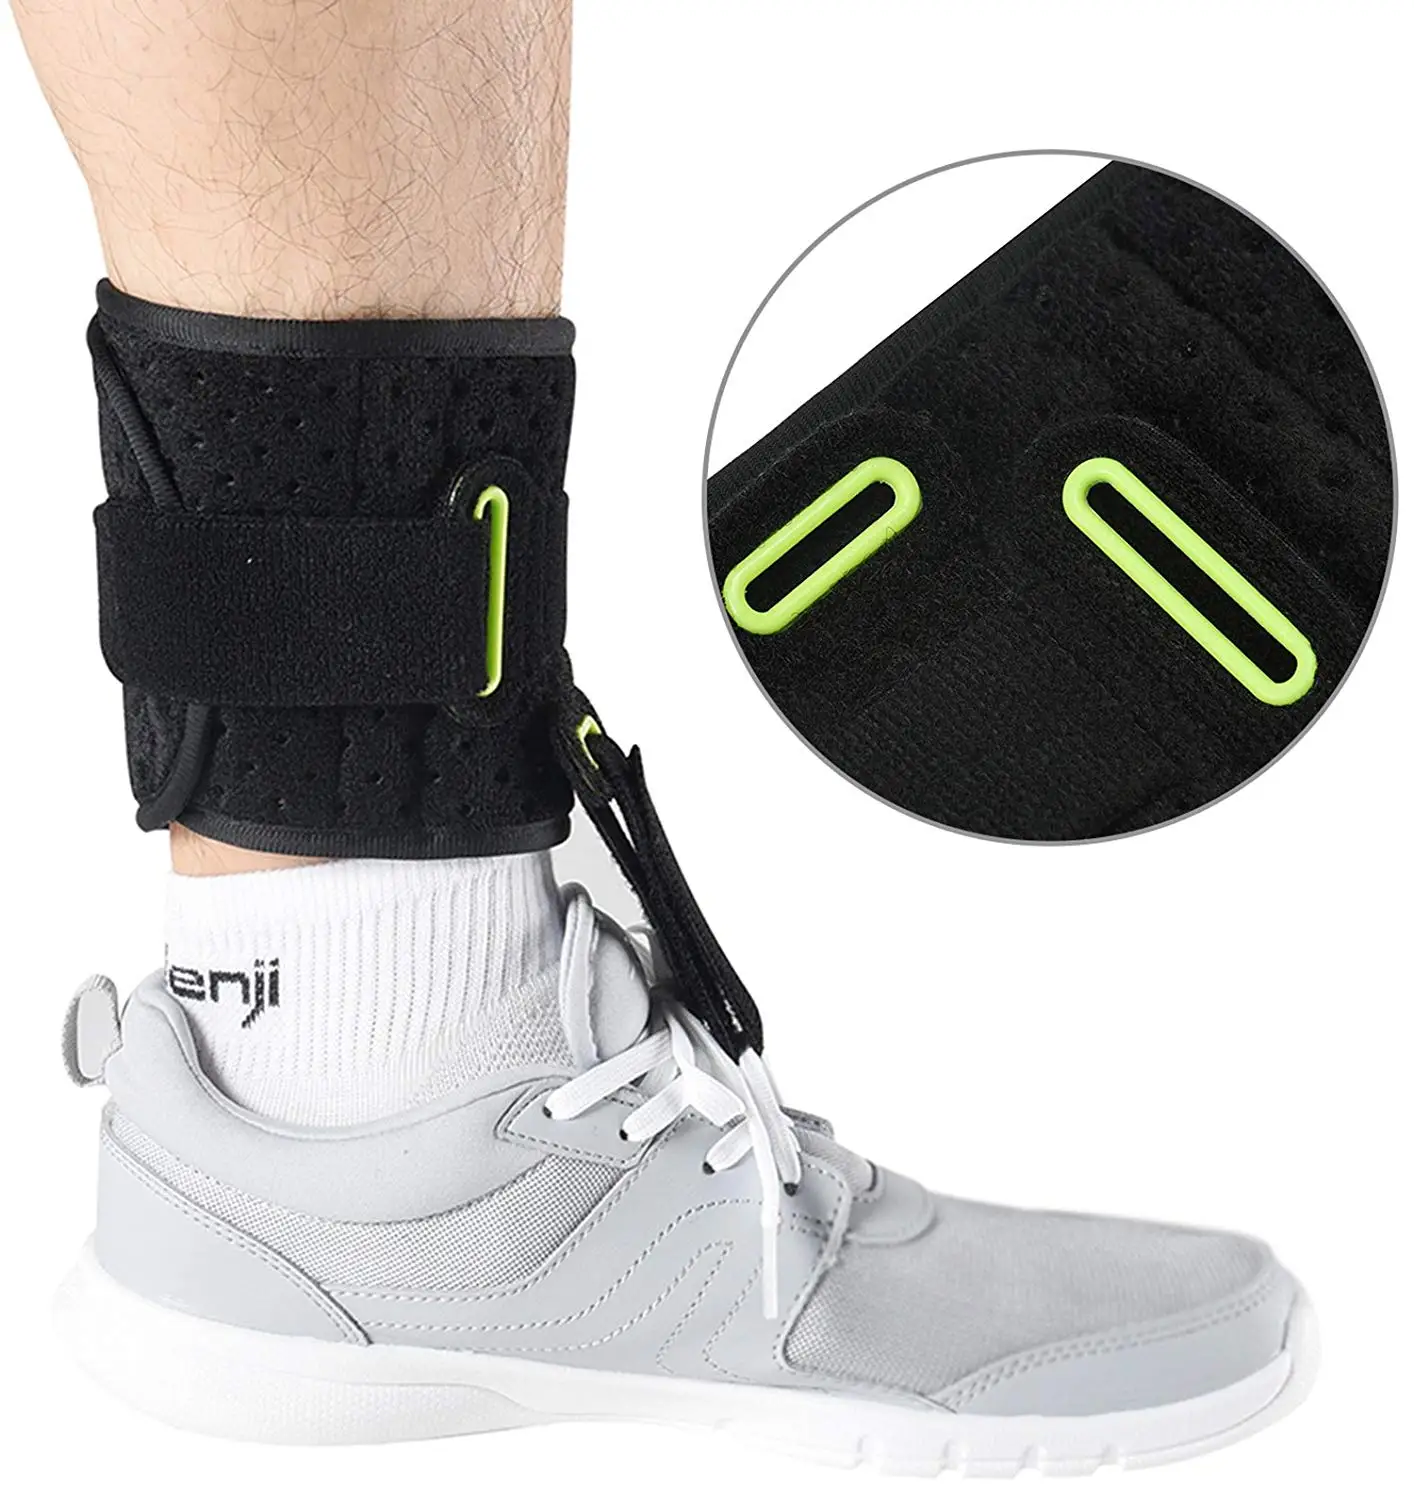 

Braces Supports Adjustable Ankle Foot Support Brace Plantar Fasciitis Foot Drop Foot Cramp Prevent Foot Stabilizer Pain Health